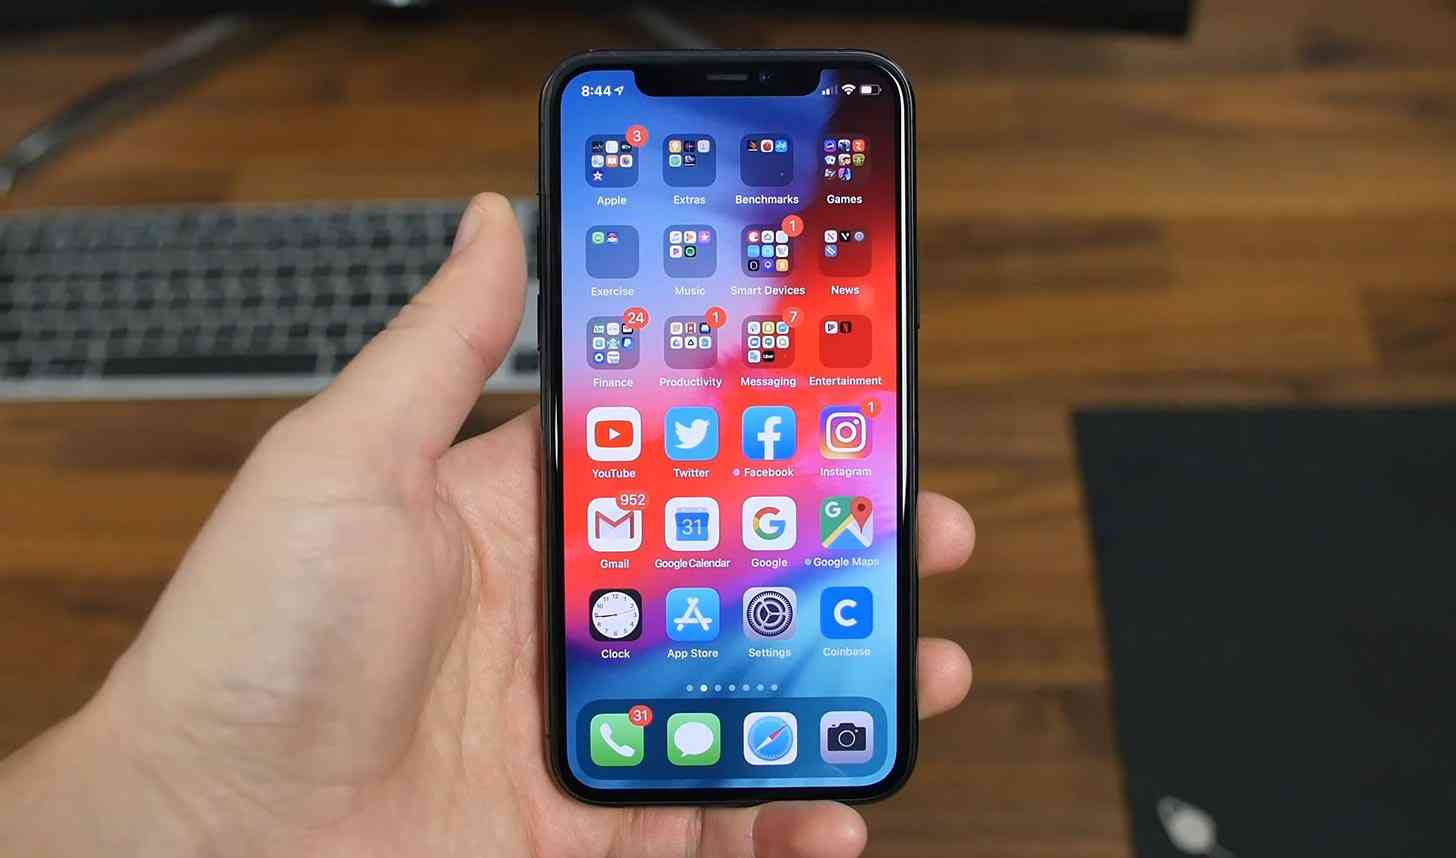 iPhone 11 Pro review